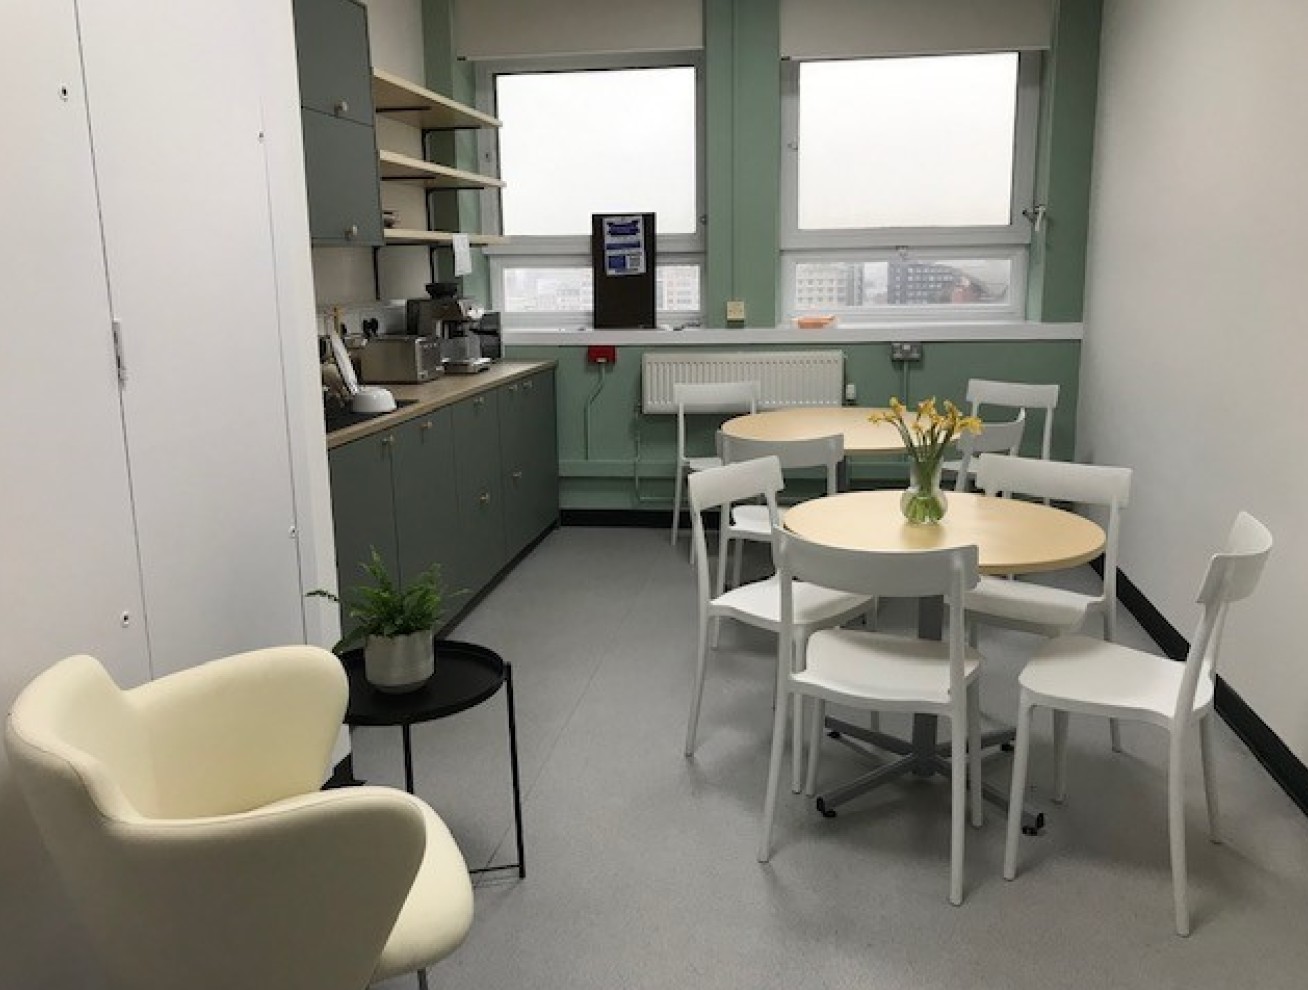 Common spaces in Charing Cross Hospital